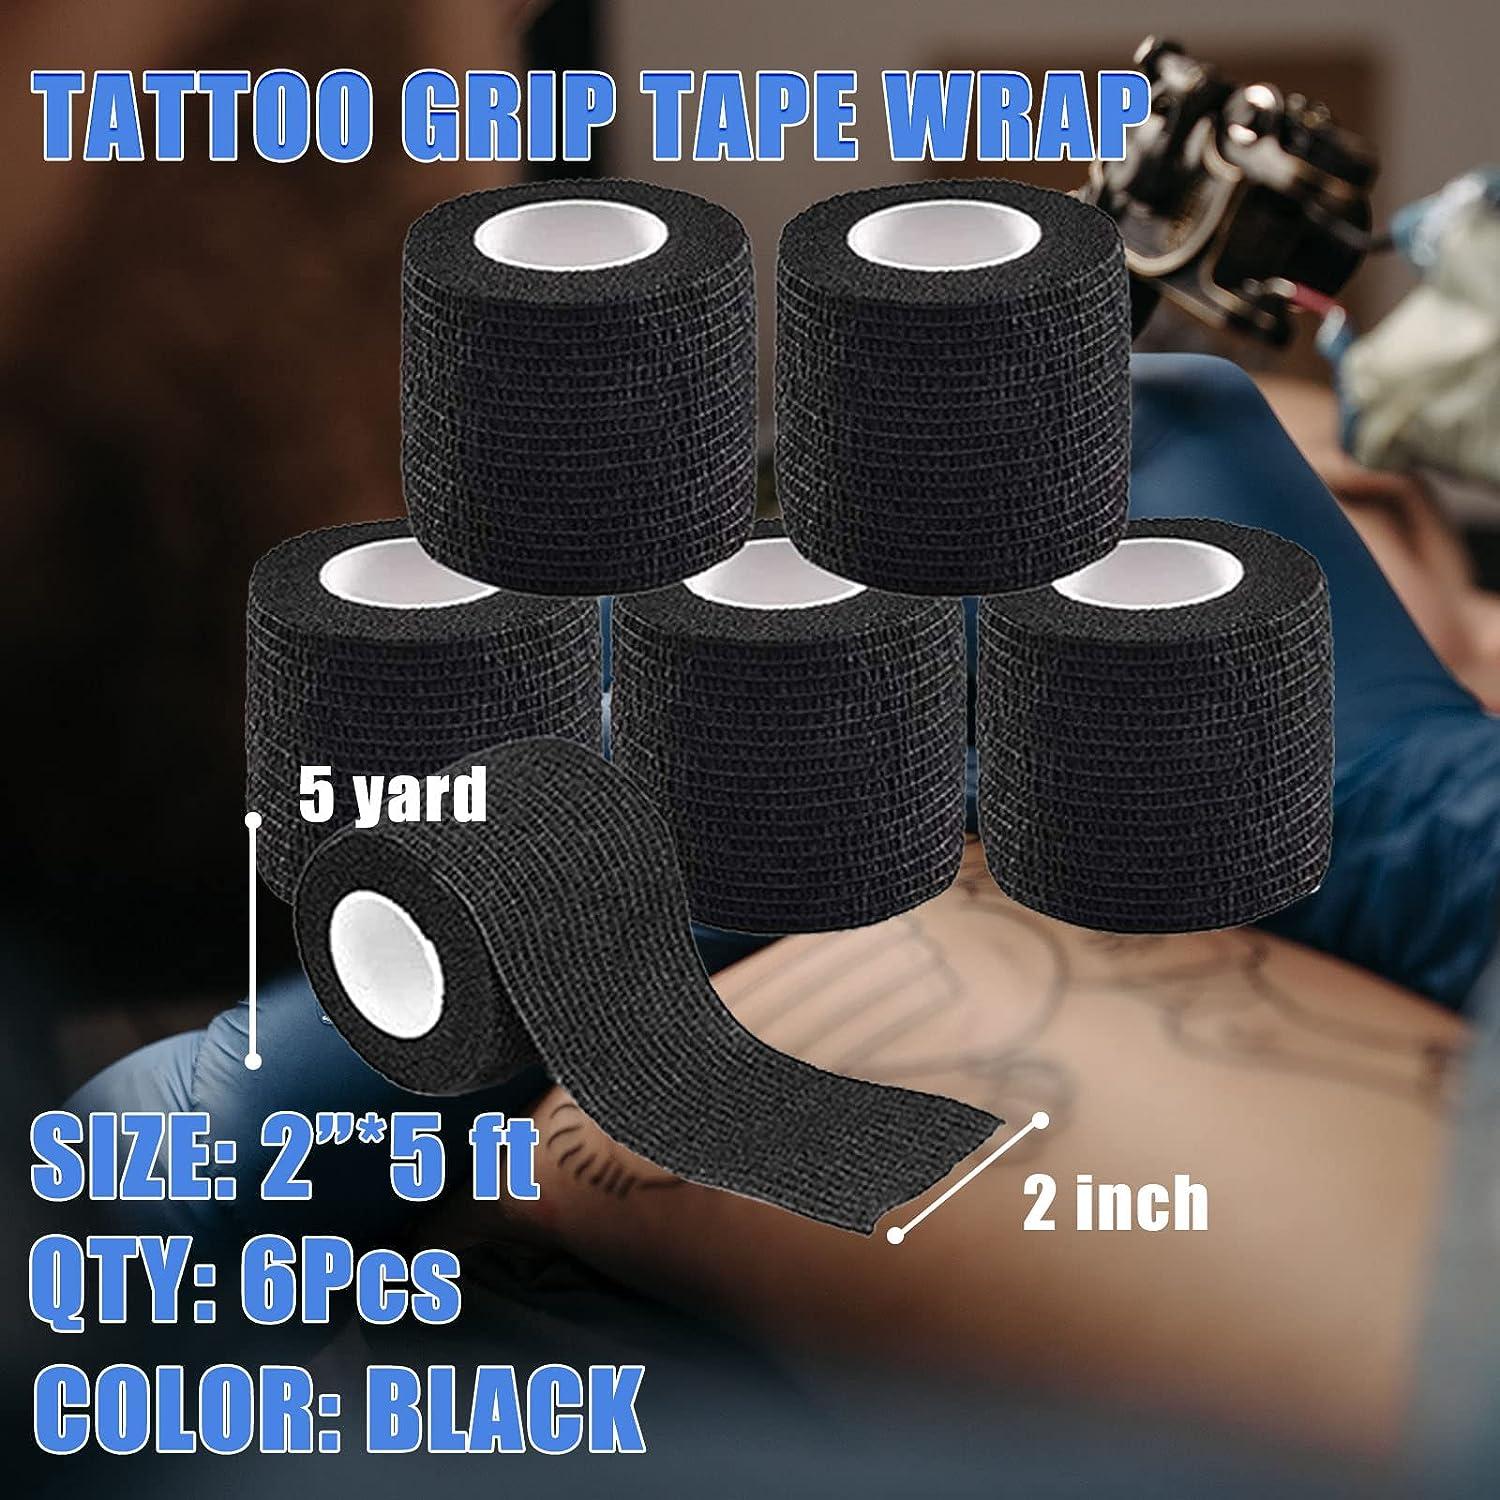 Clip Cord Covers with Grip Tape Wraps - NAQASE 125pcs Clip Cord Bags Pen  Bags Cord Sleeves Blue Clip Cord Covers Wrap and 6pcs Tattoo Bandages  Elastic Grip Tape Wraps Black+6pcs 